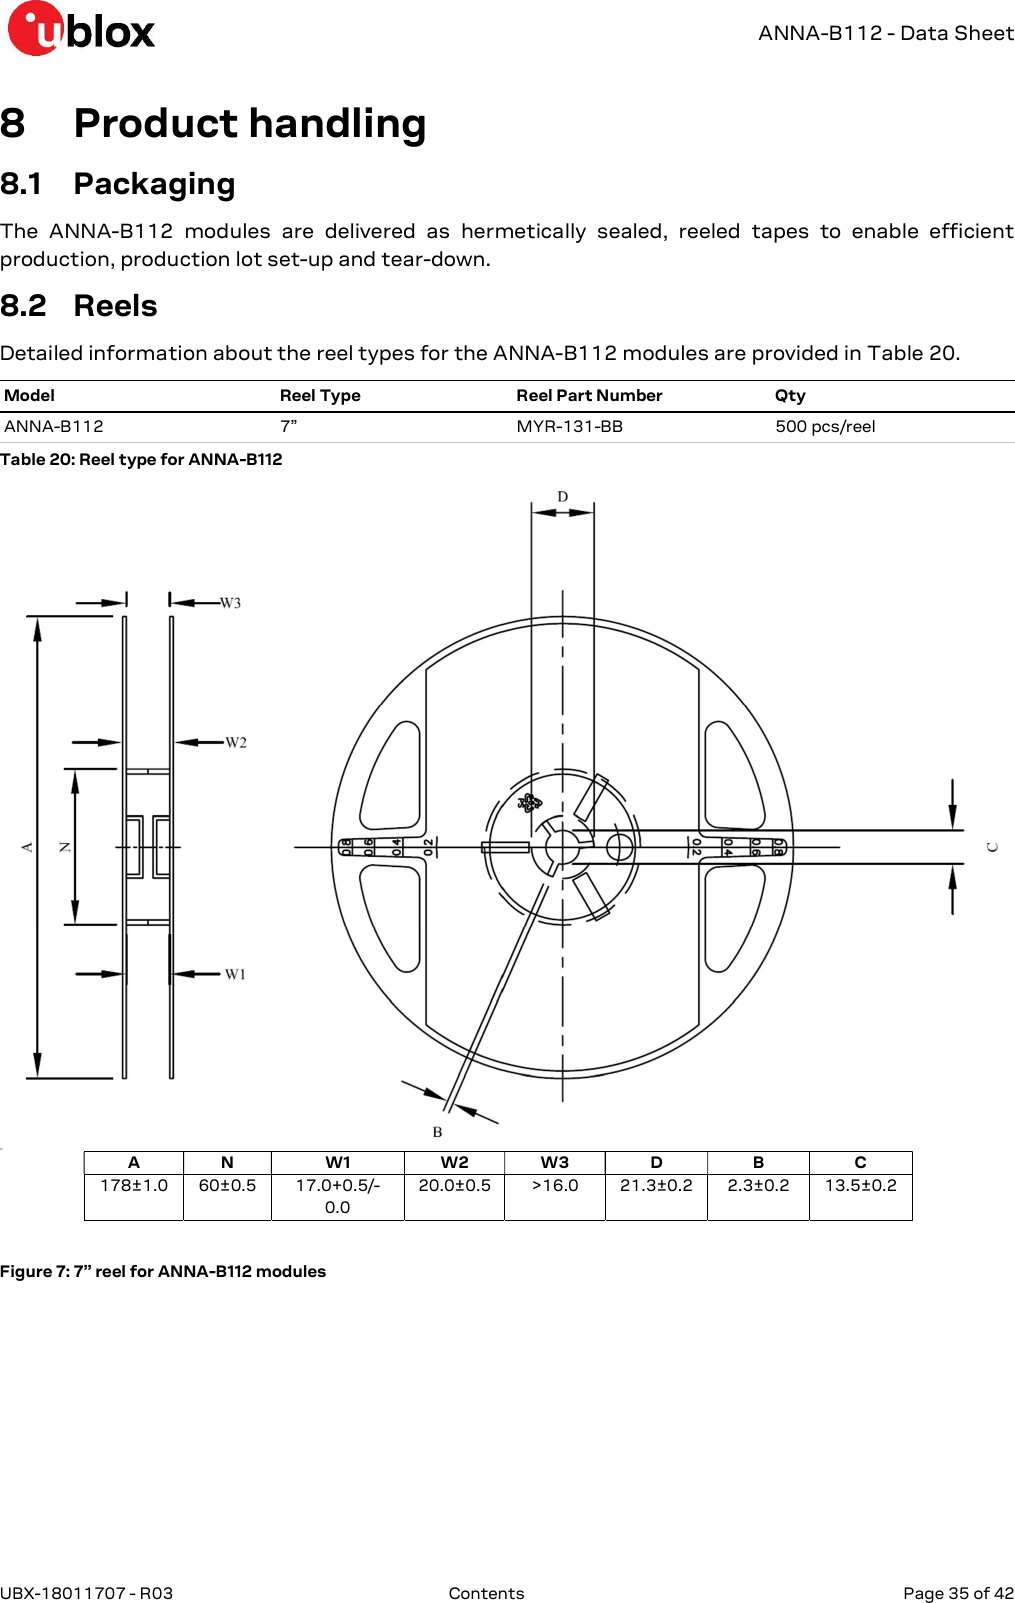   ANNA-B112 - Data Sheet UBX-18011707 - R03  Contents   Page 35 of 42      8 Product handling  8.1 Packaging The  ANNA-B112  modules  are  delivered  as  hermetically  sealed,  reeled  tapes  to  enable  efficient production, production lot set-up and tear-down.  8.2 Reels Detailed information about the reel types for the ANNA-B112 modules are provided in Table 20. Model  Reel Type  Reel Part Number  Qty ANNA-B112  7”  MYR-131-BB  500 pcs/reel Table 20: Reel type for ANNA-B112  A N W1 W2 W3 D B C 178±1.0 60±0.5 17.0+0.5/-0.0 20.0±0.5 &gt;16.0 21.3±0.2 2.3±0.2 13.5±0.2  Figure 7: 7” reel for ANNA-B112 modules   